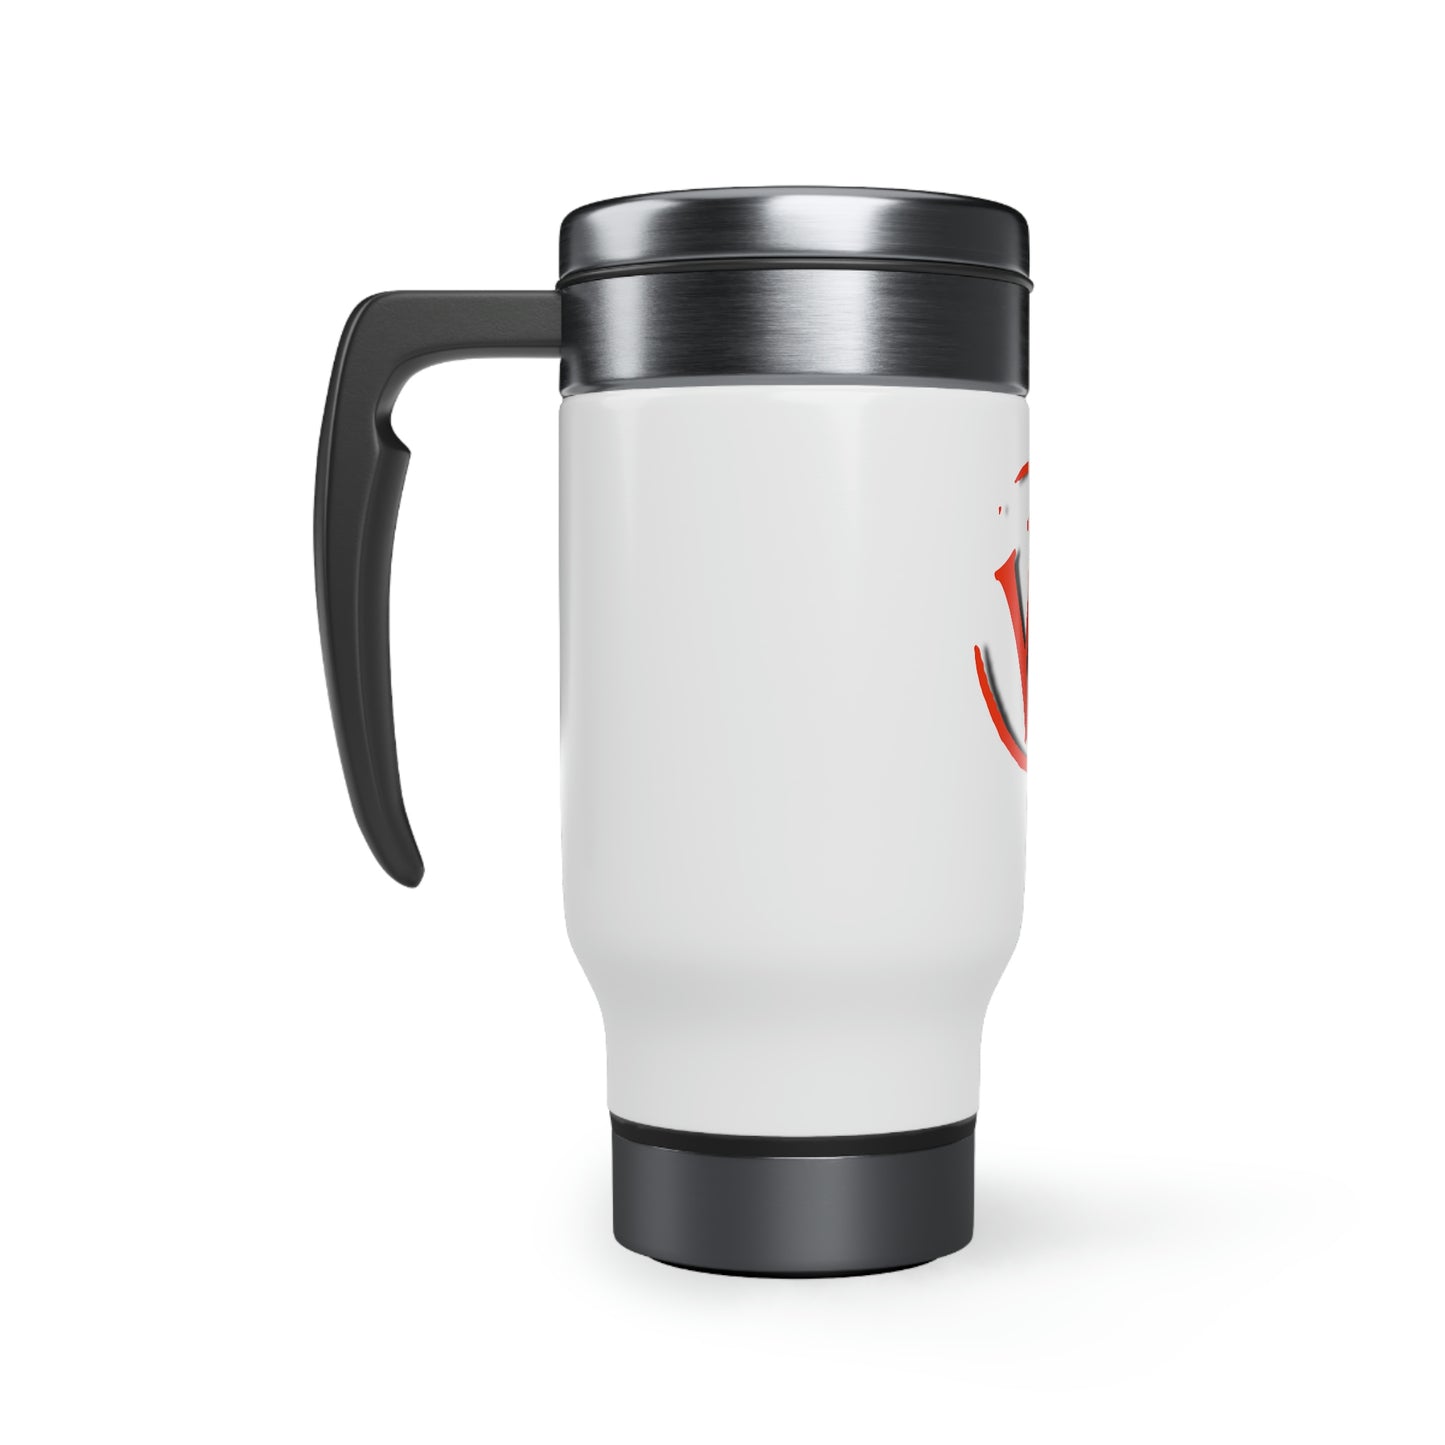 Branded Cowboy Stainless Steel Travel Mug with Handle, 14oz  #H10-02C